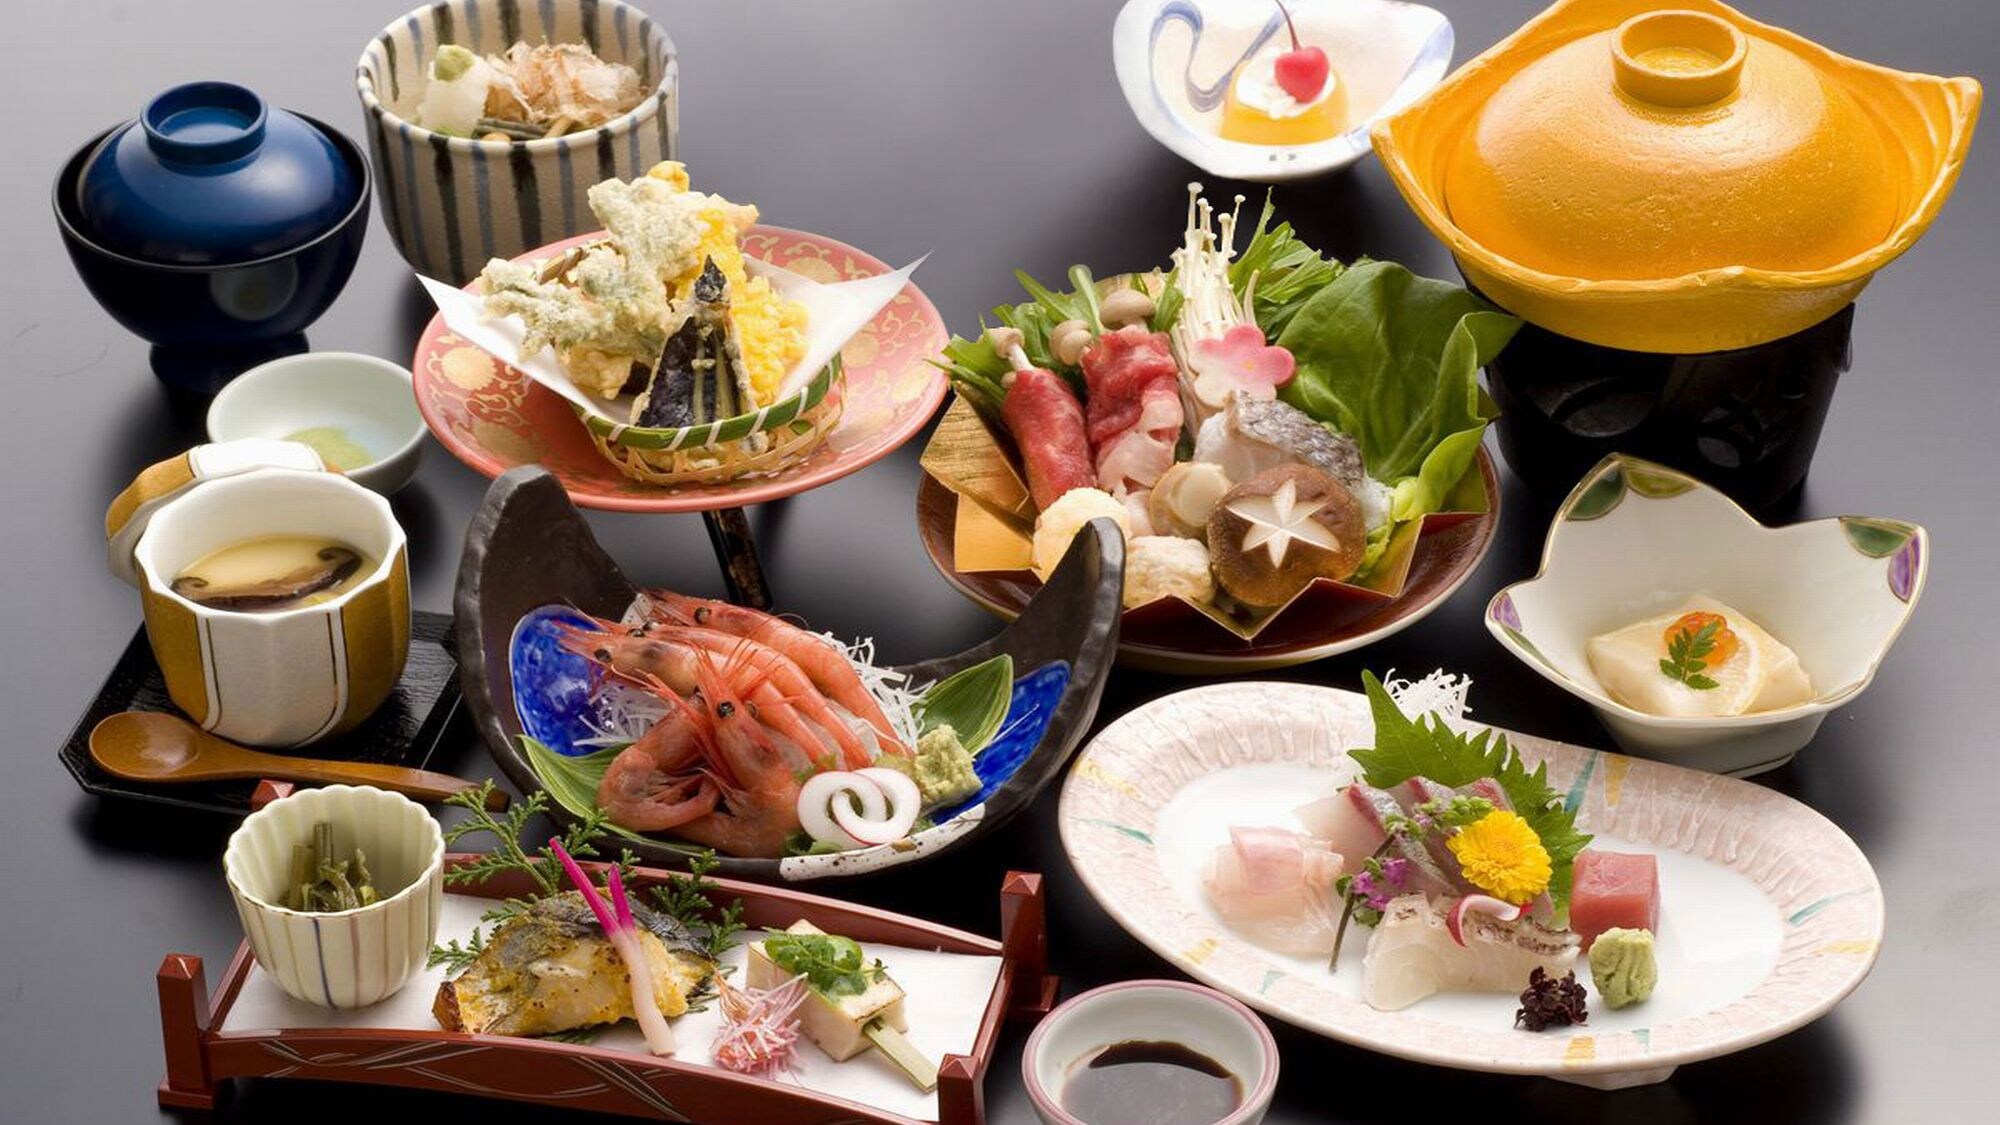 [Omakase Gozen] A variety of dishes that incorporate seafood from the Sea of Japan (an example of menu)